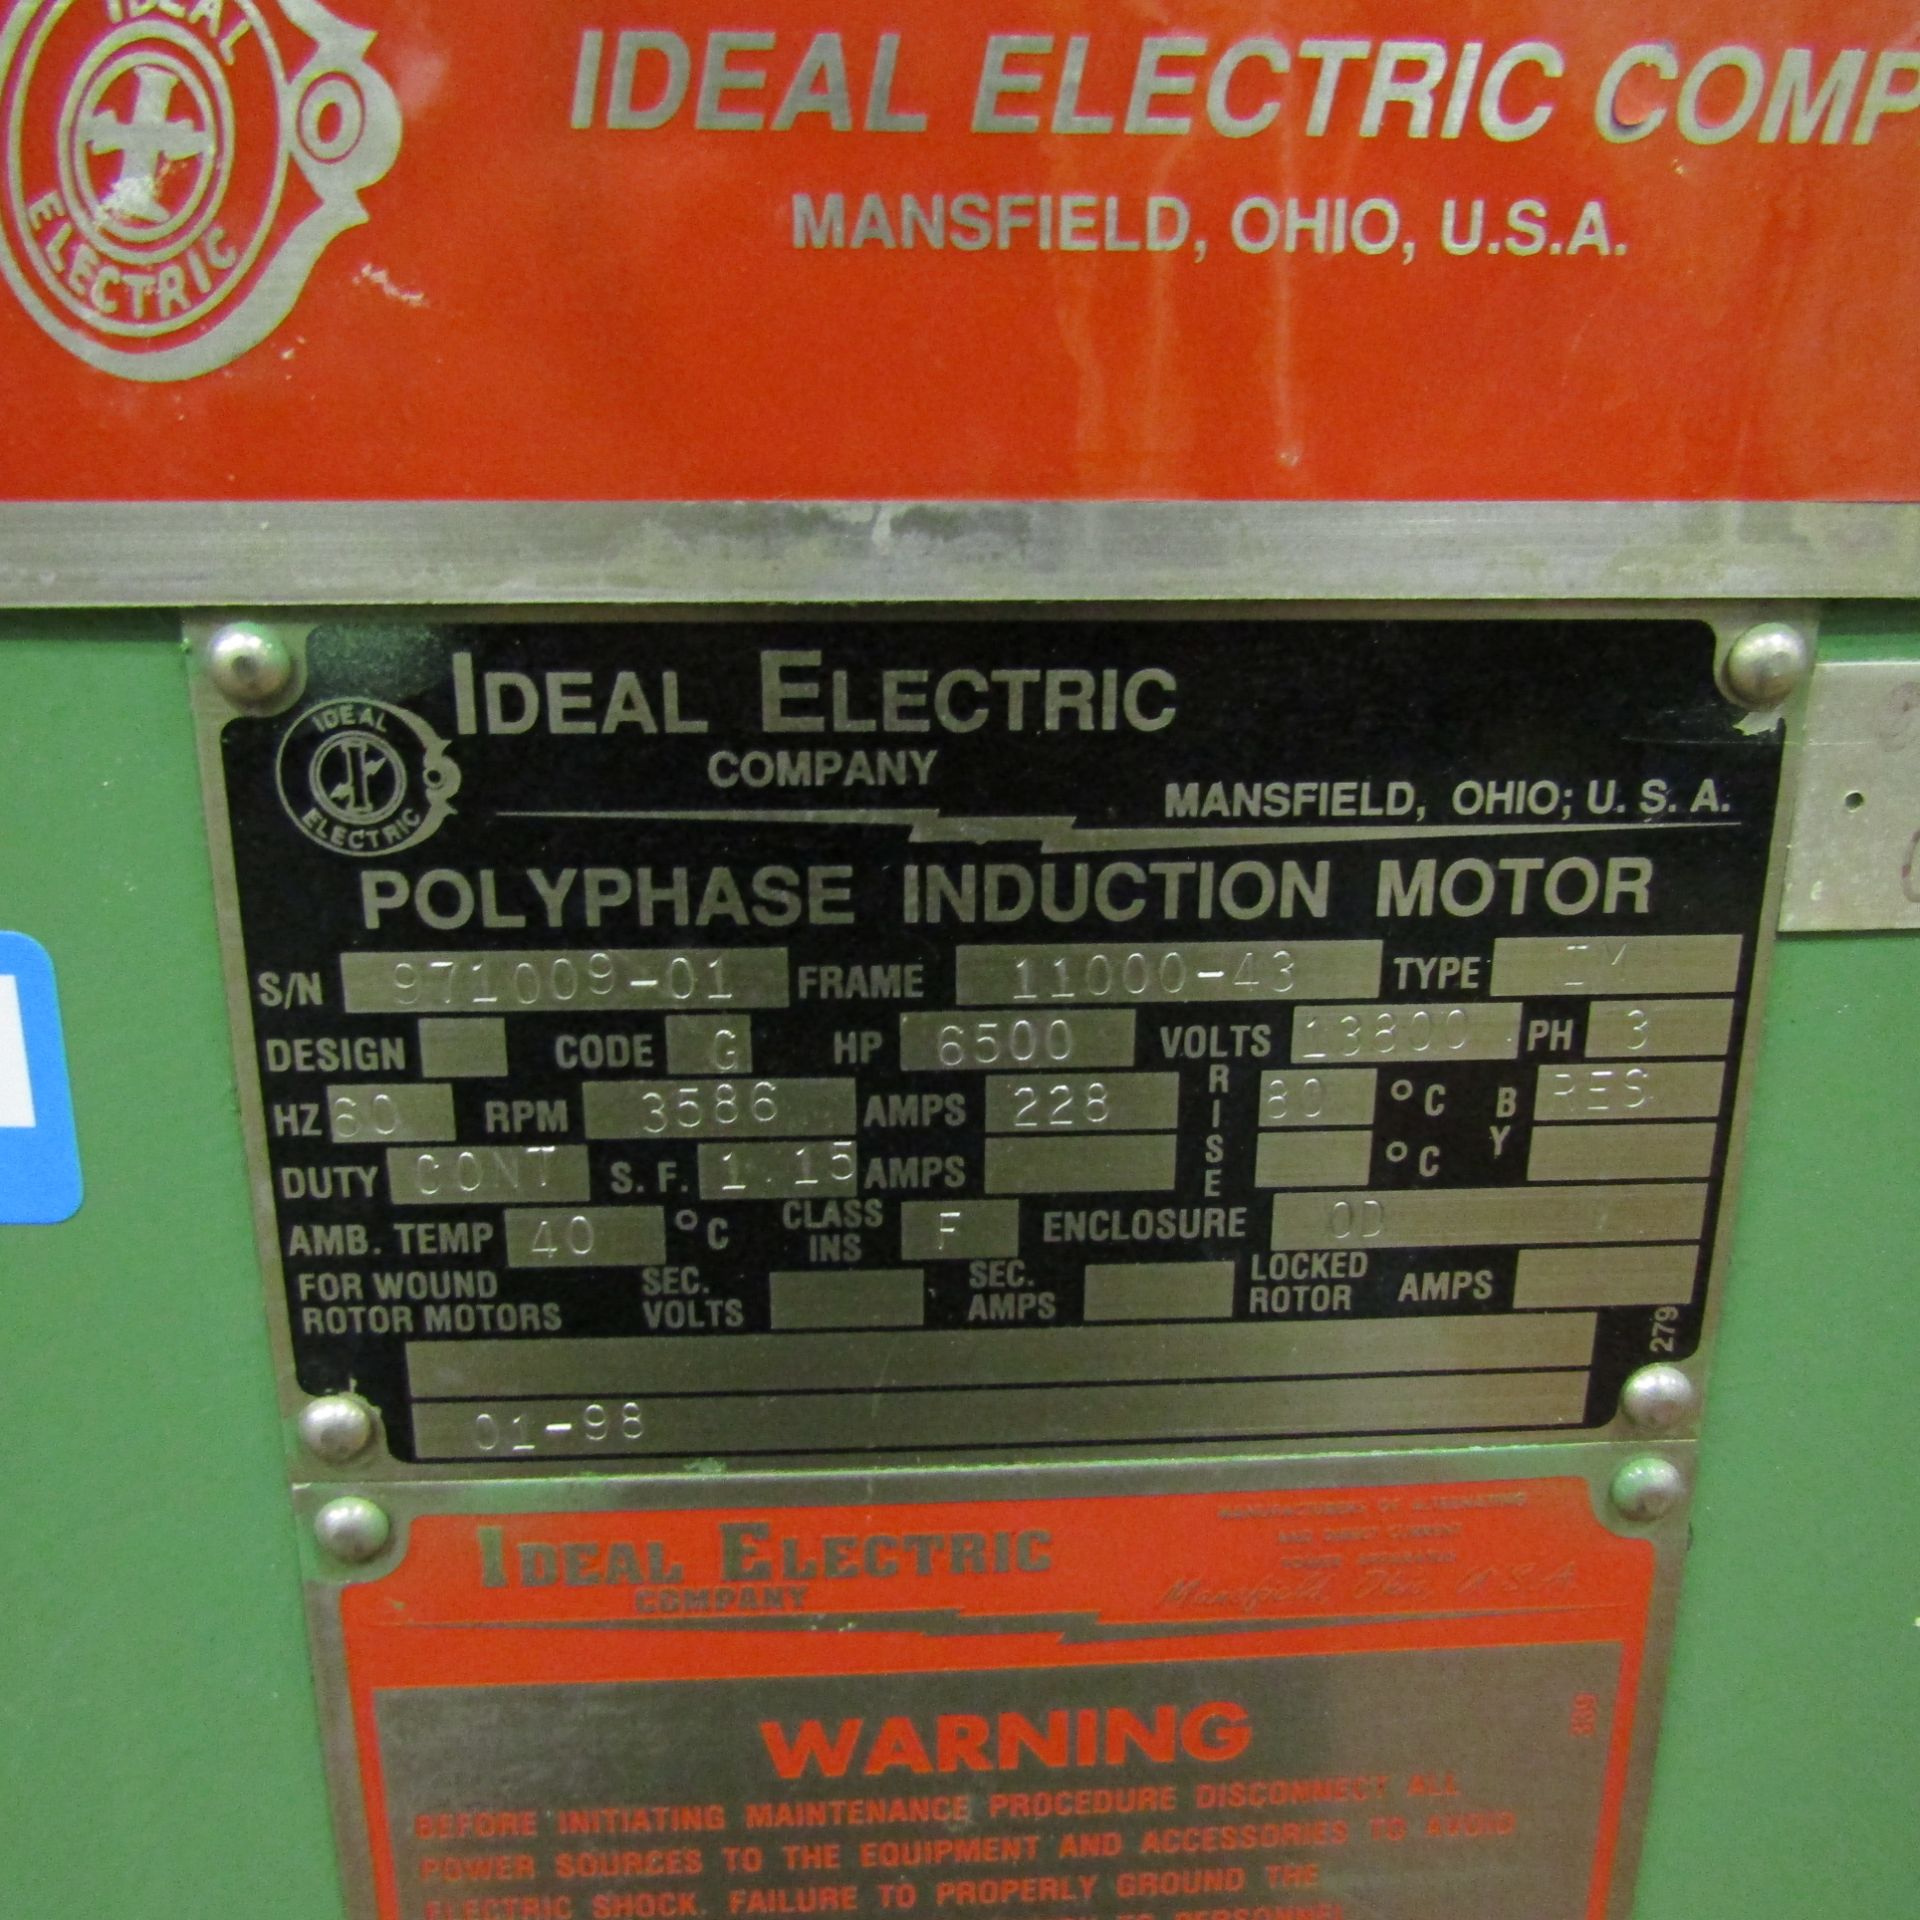 Ideal Electric 6500HP 3583 RPM Induction Motor - Image 2 of 5